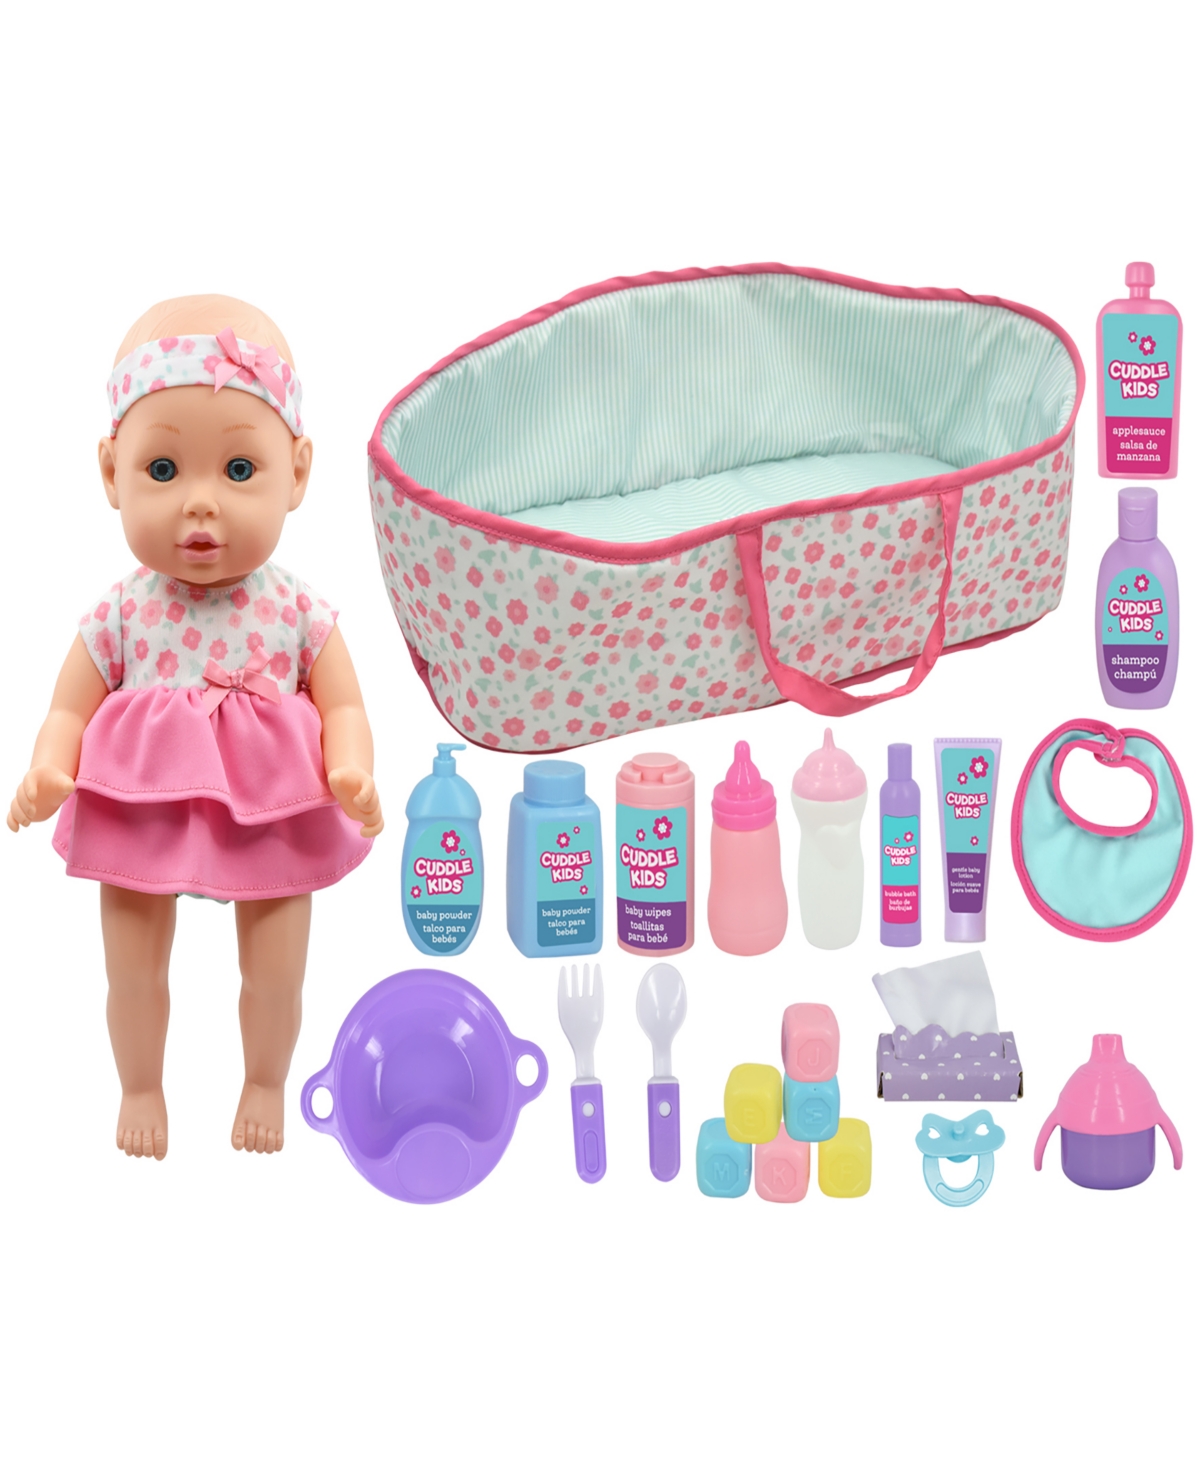 Cuddle Baby Doll Carry Play Set, 27 Pieces In Pink